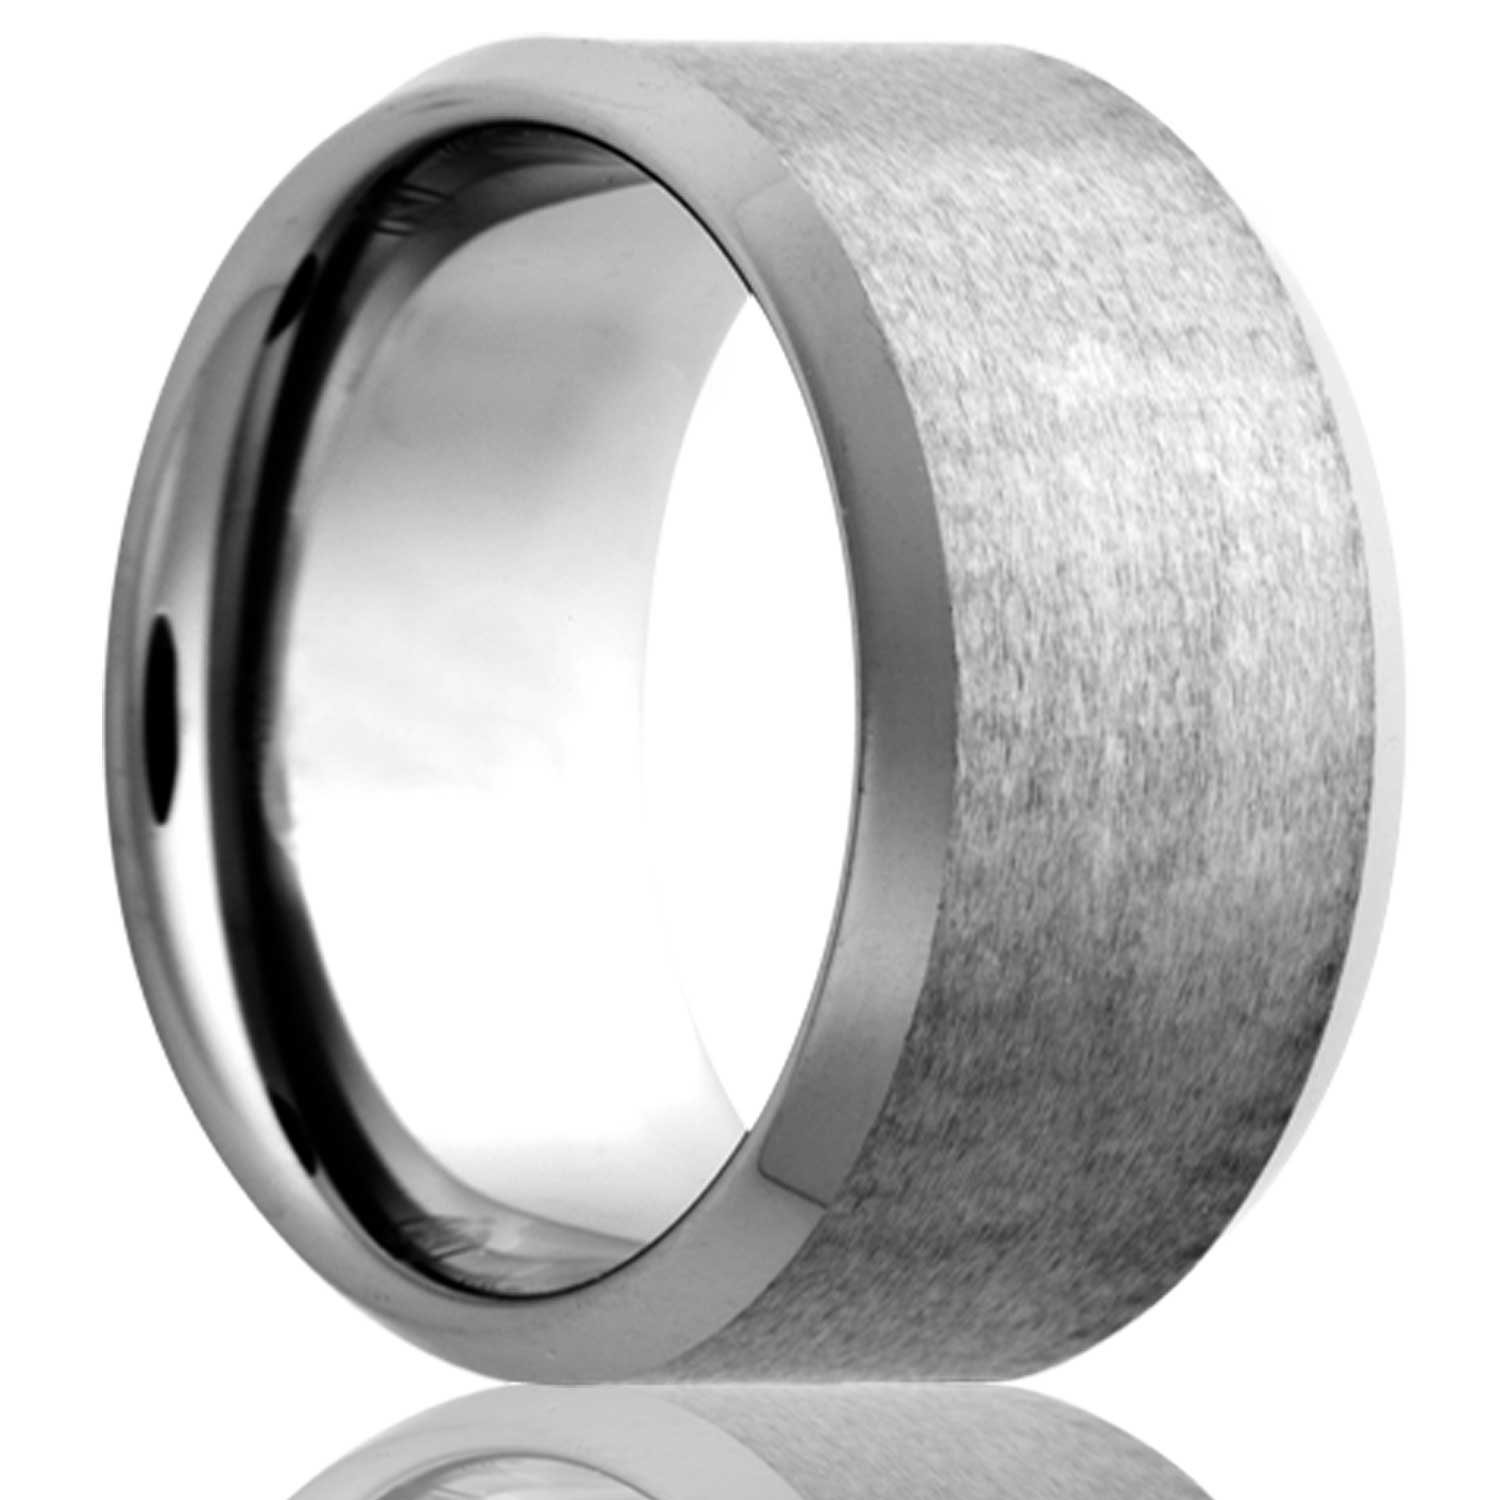 A tungsten wedding band with satin finish & beveled edges displayed on a neutral white background.